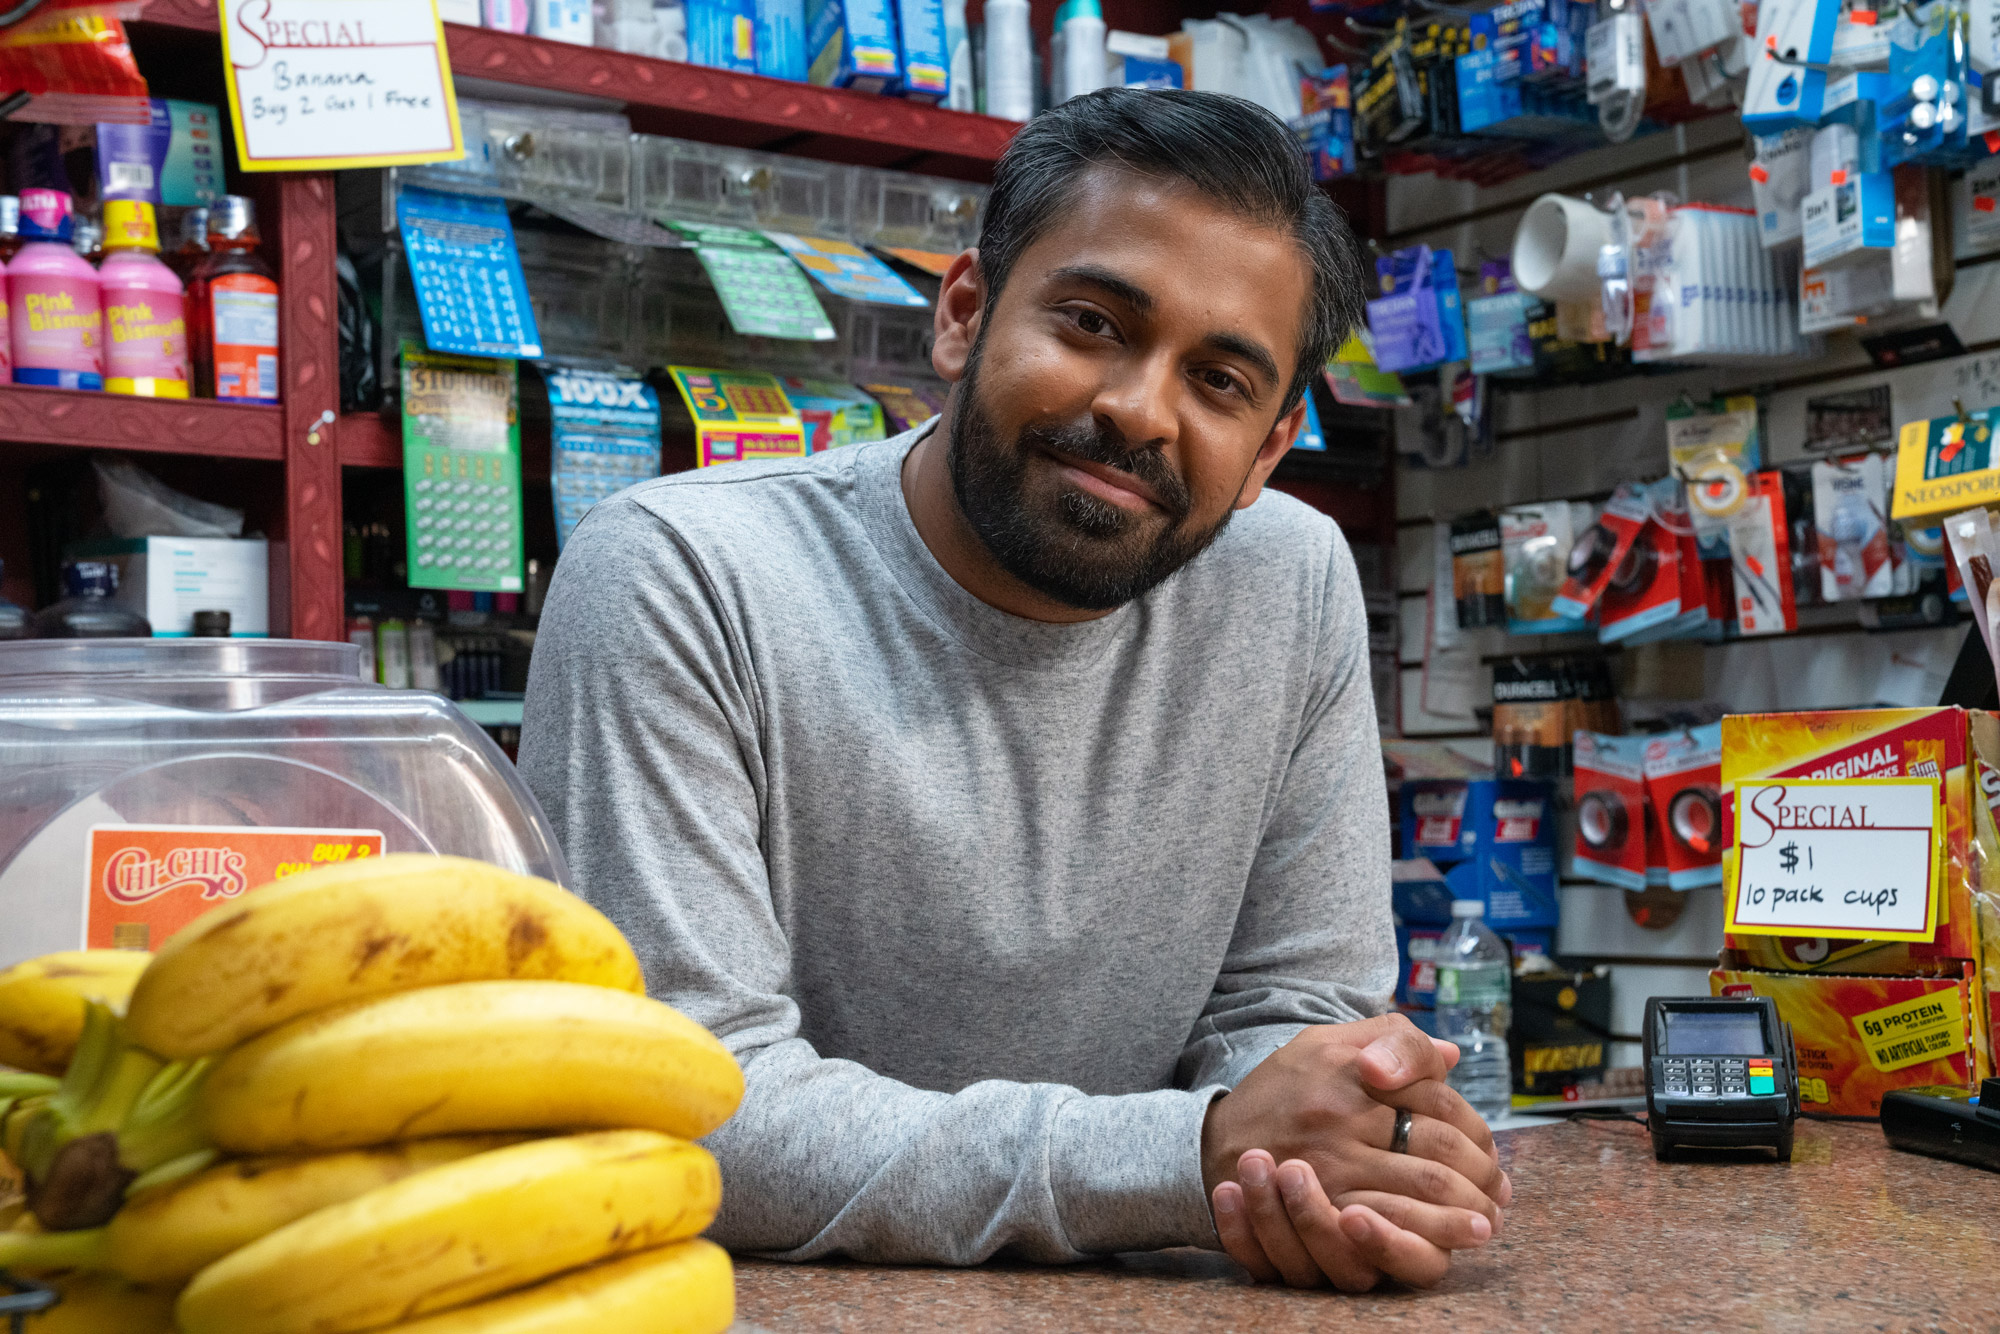 A shop keeper smiles from behind a counter